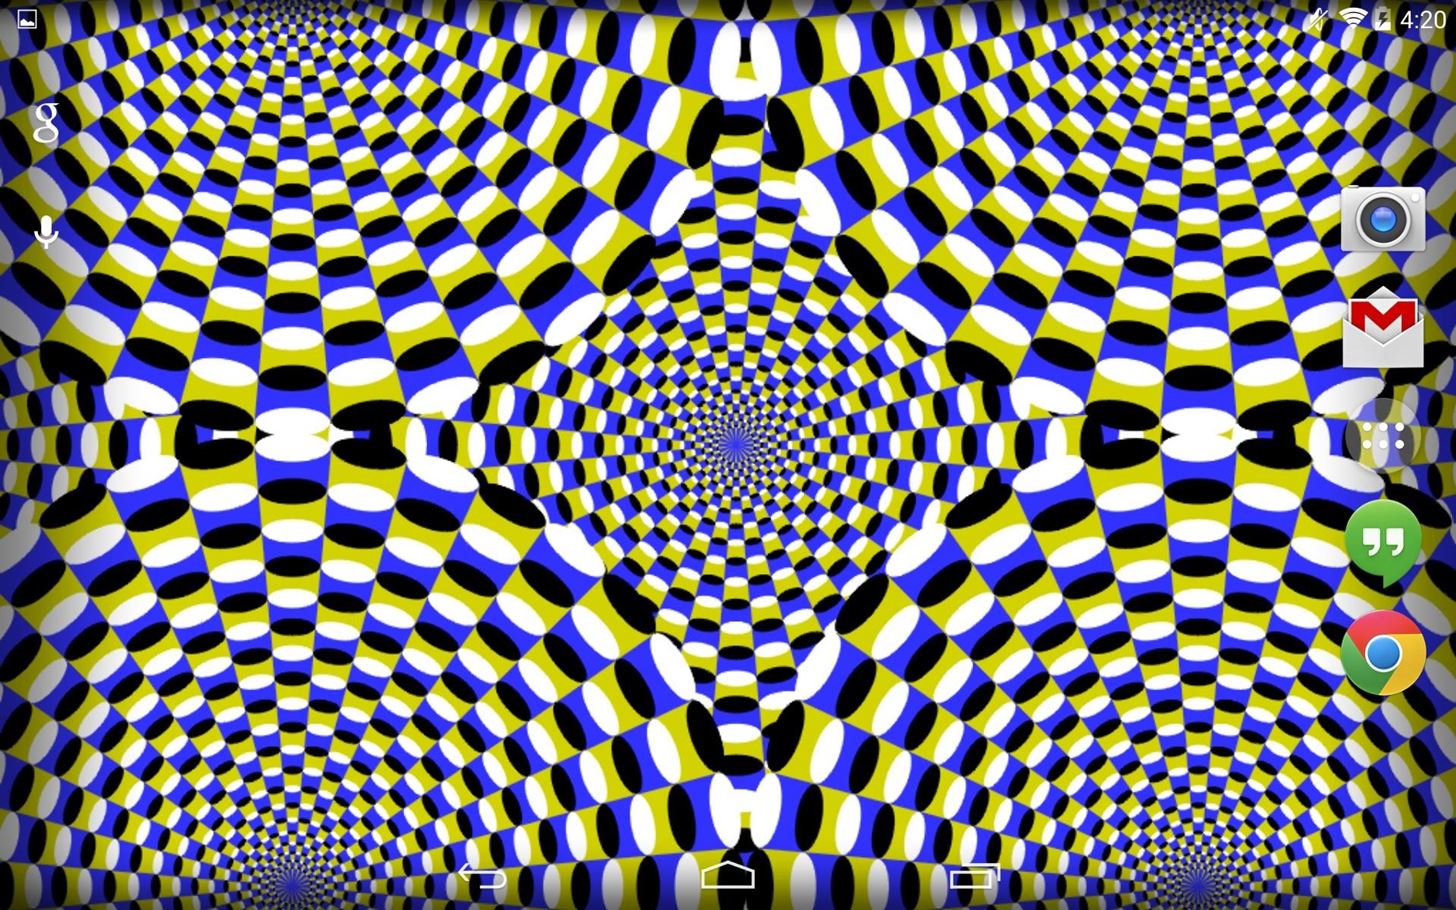 Warning: These 5 Psychedelic Wallpapers for Your Nexus 7 Will Trip You Out